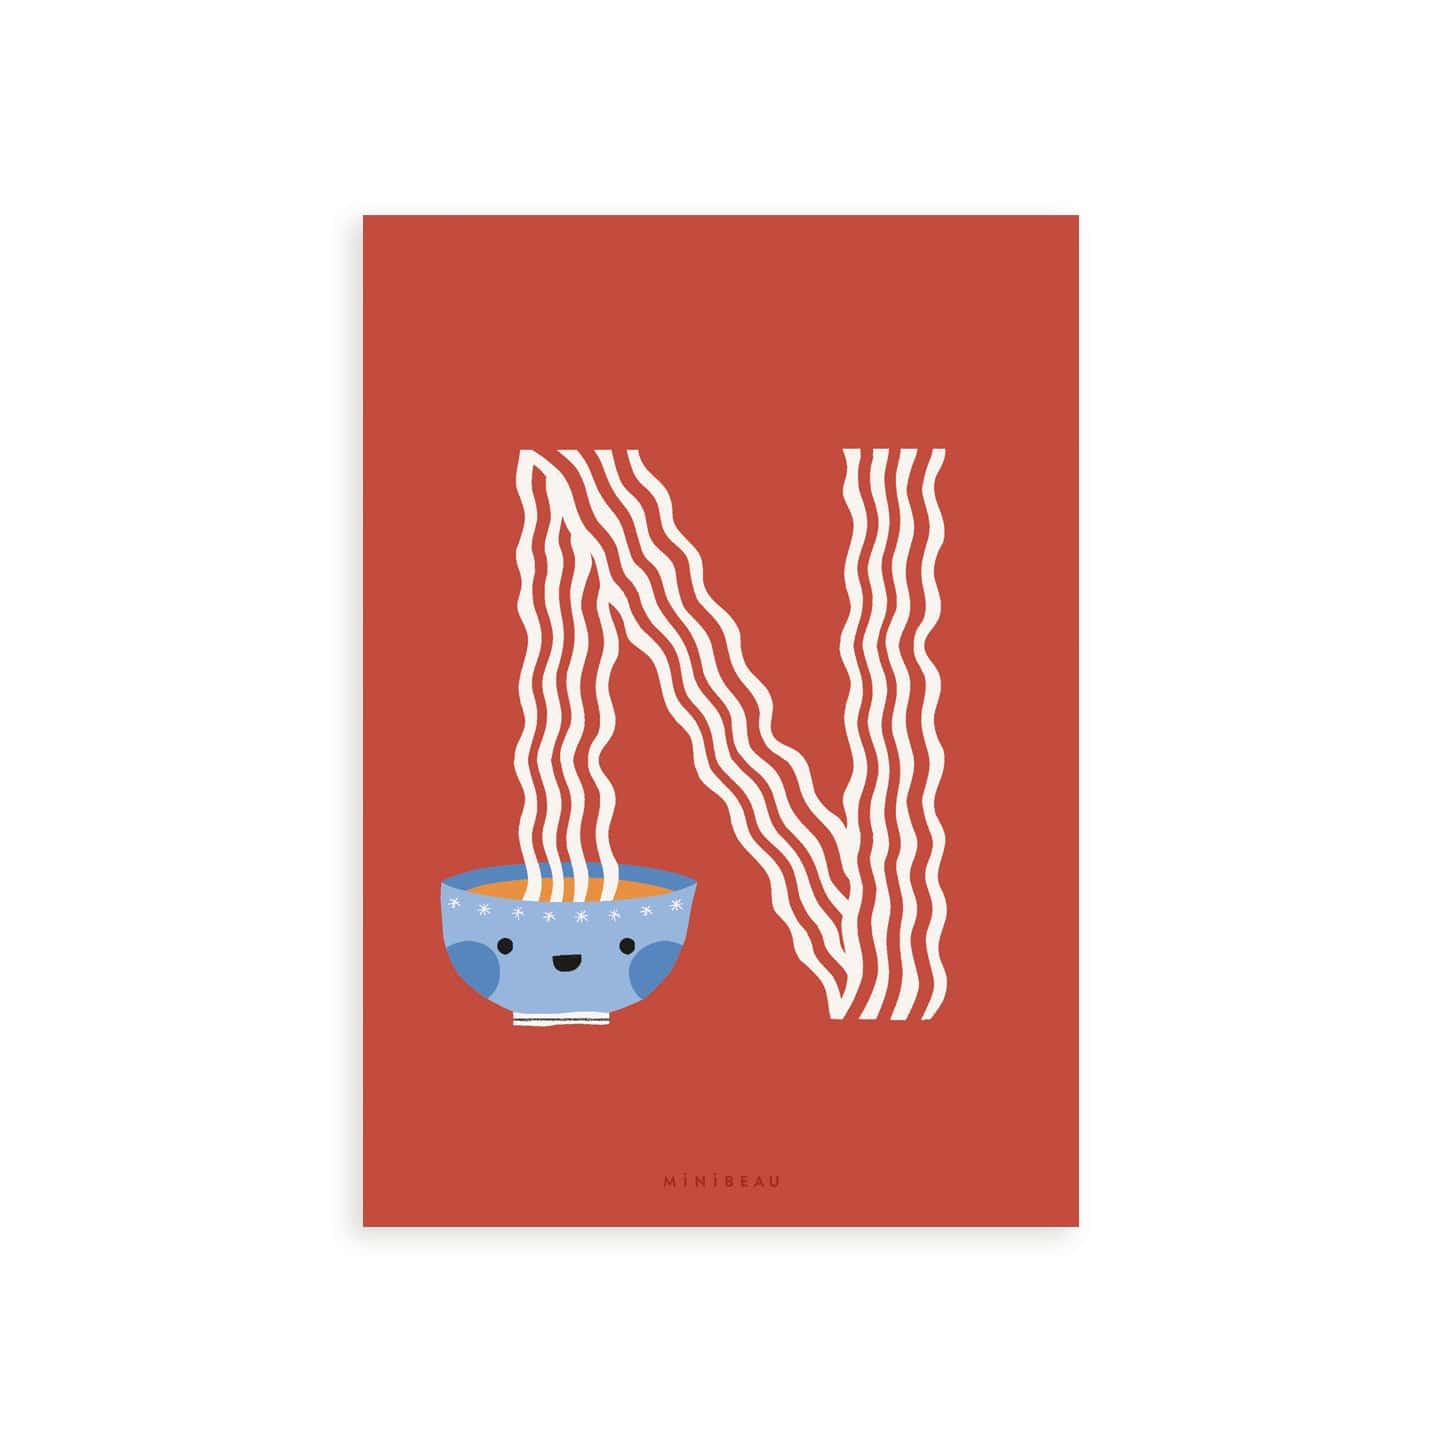 Our Happy Alphabet 'N' Art Print shows a blue bowl of long white noodles which  come out of the bowl to form an N, on a red background.